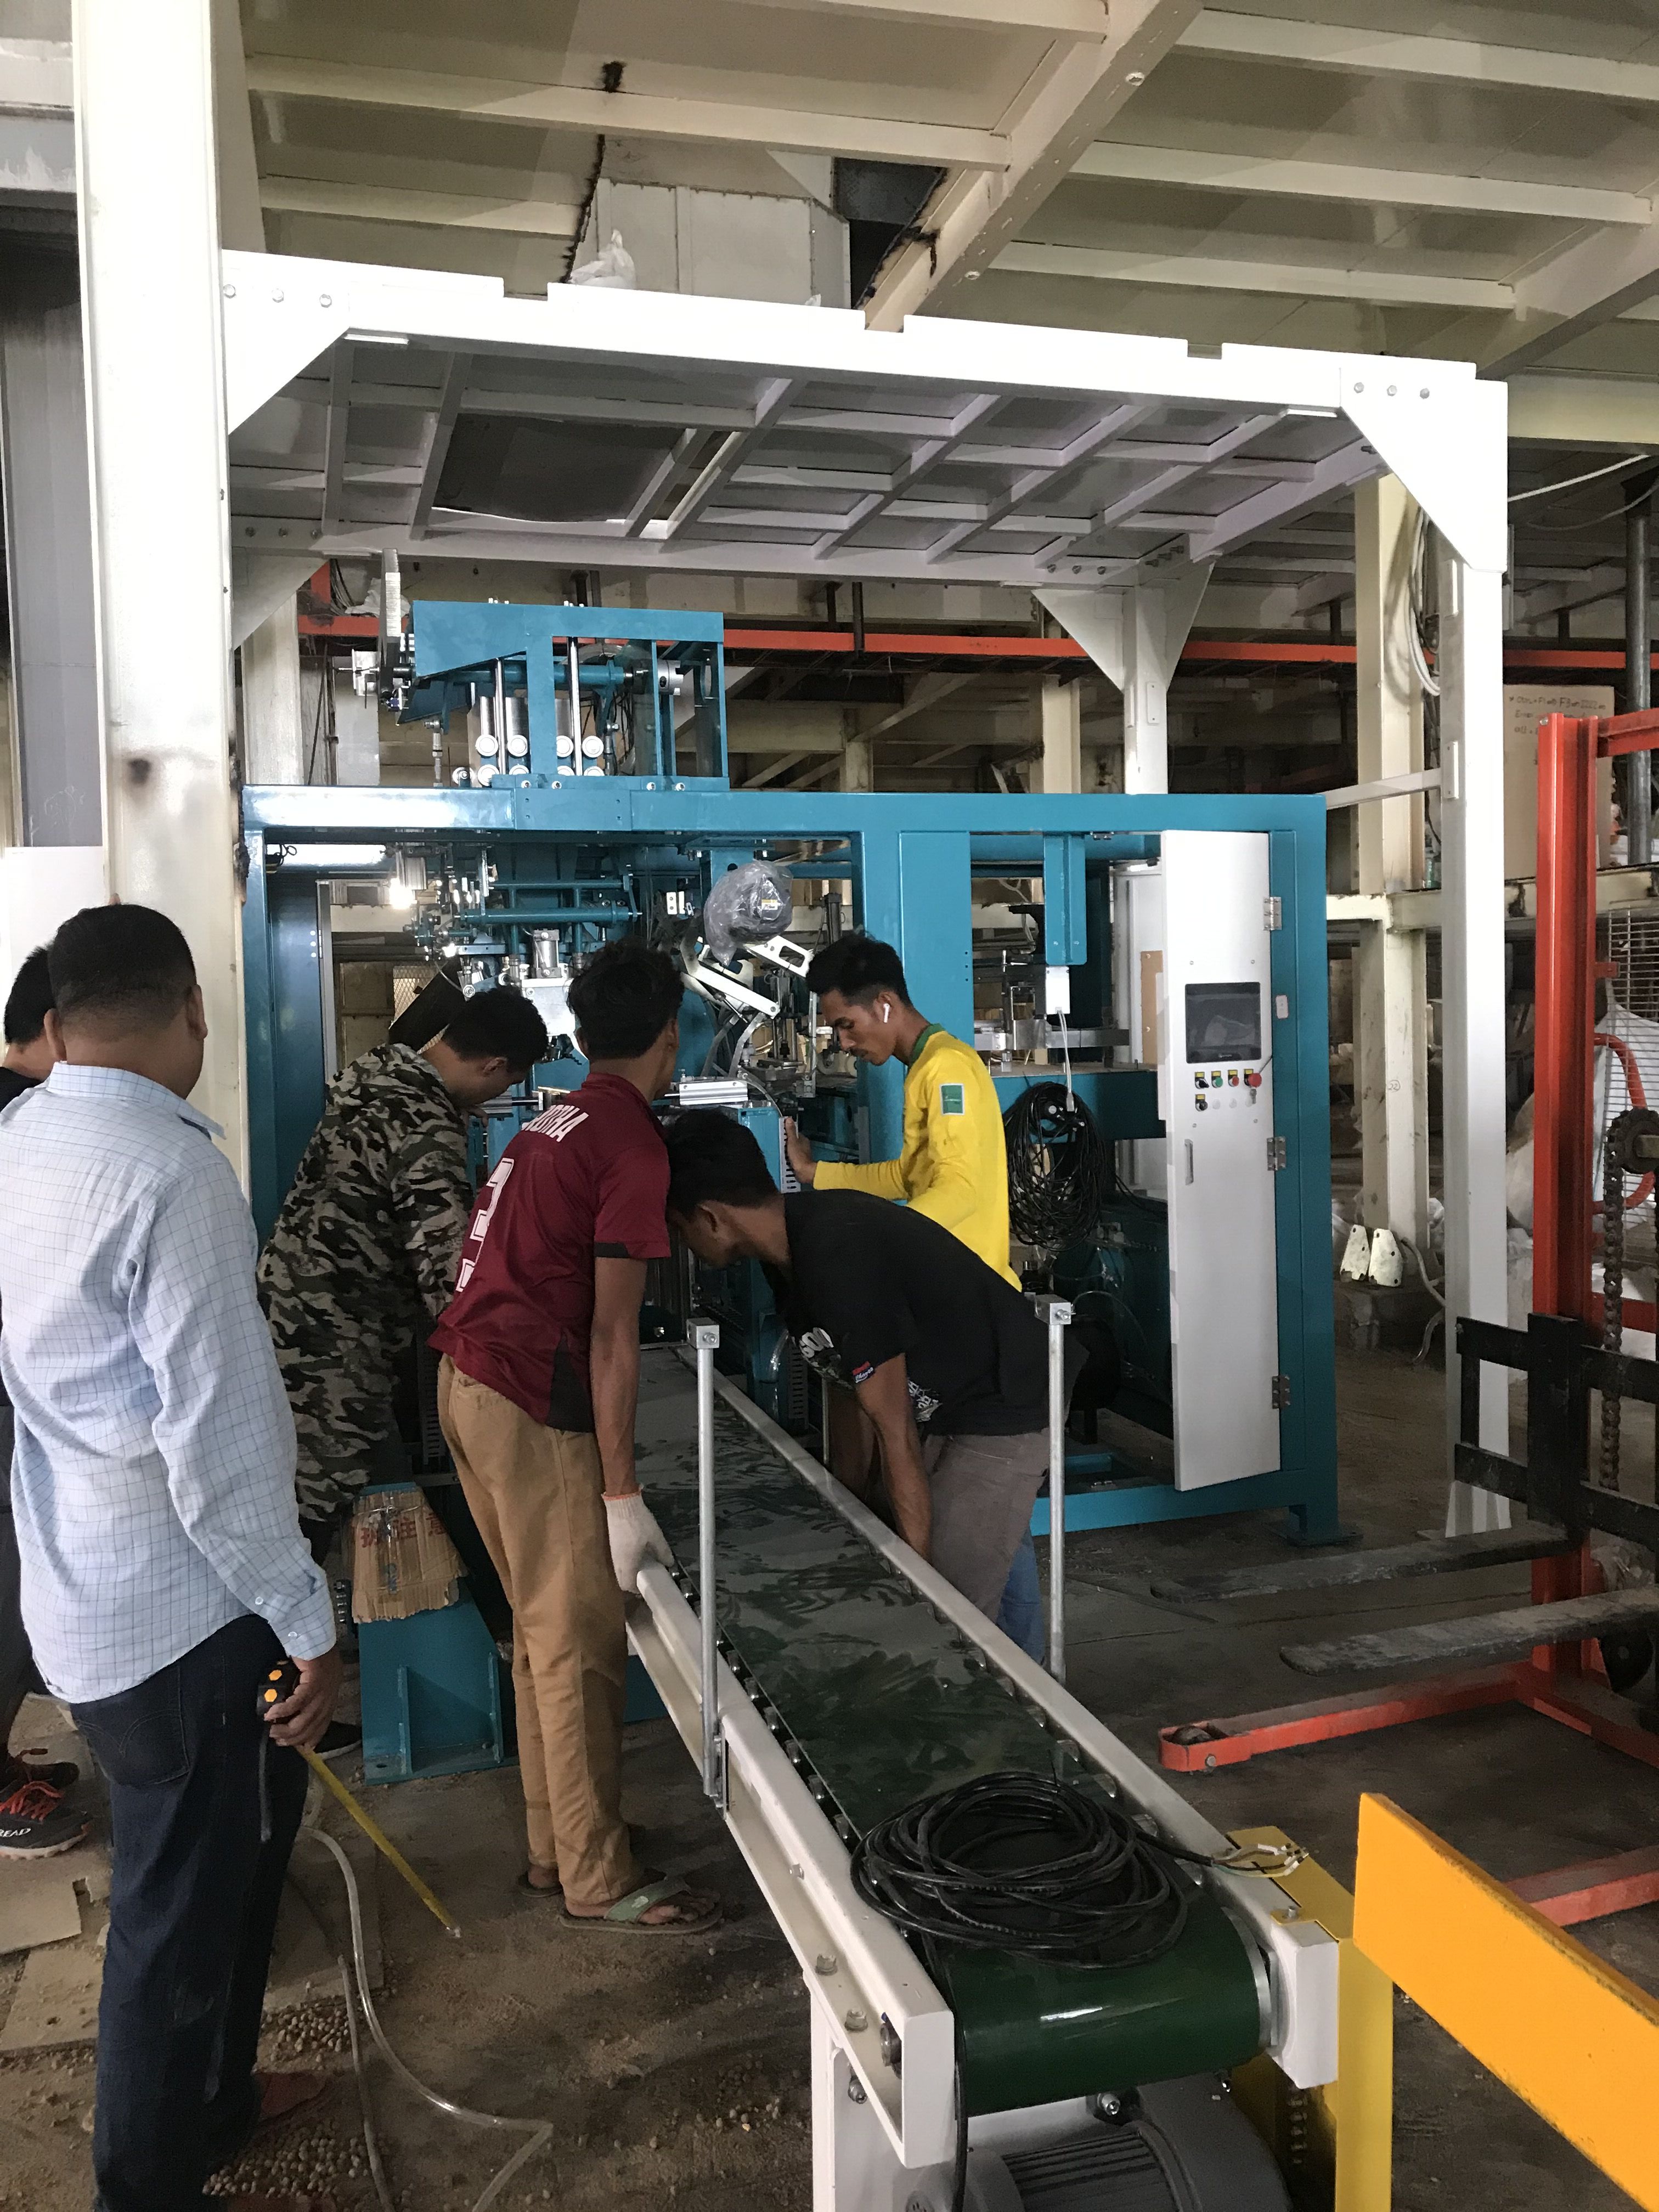 Corn packing machine DDGS Corn bagging machine Grains bagging machine Whole Grains packing machine fully Automatic Packing Palletizing Line, Fully Automatic Packing Line, Fully Automatic Bagging Line,